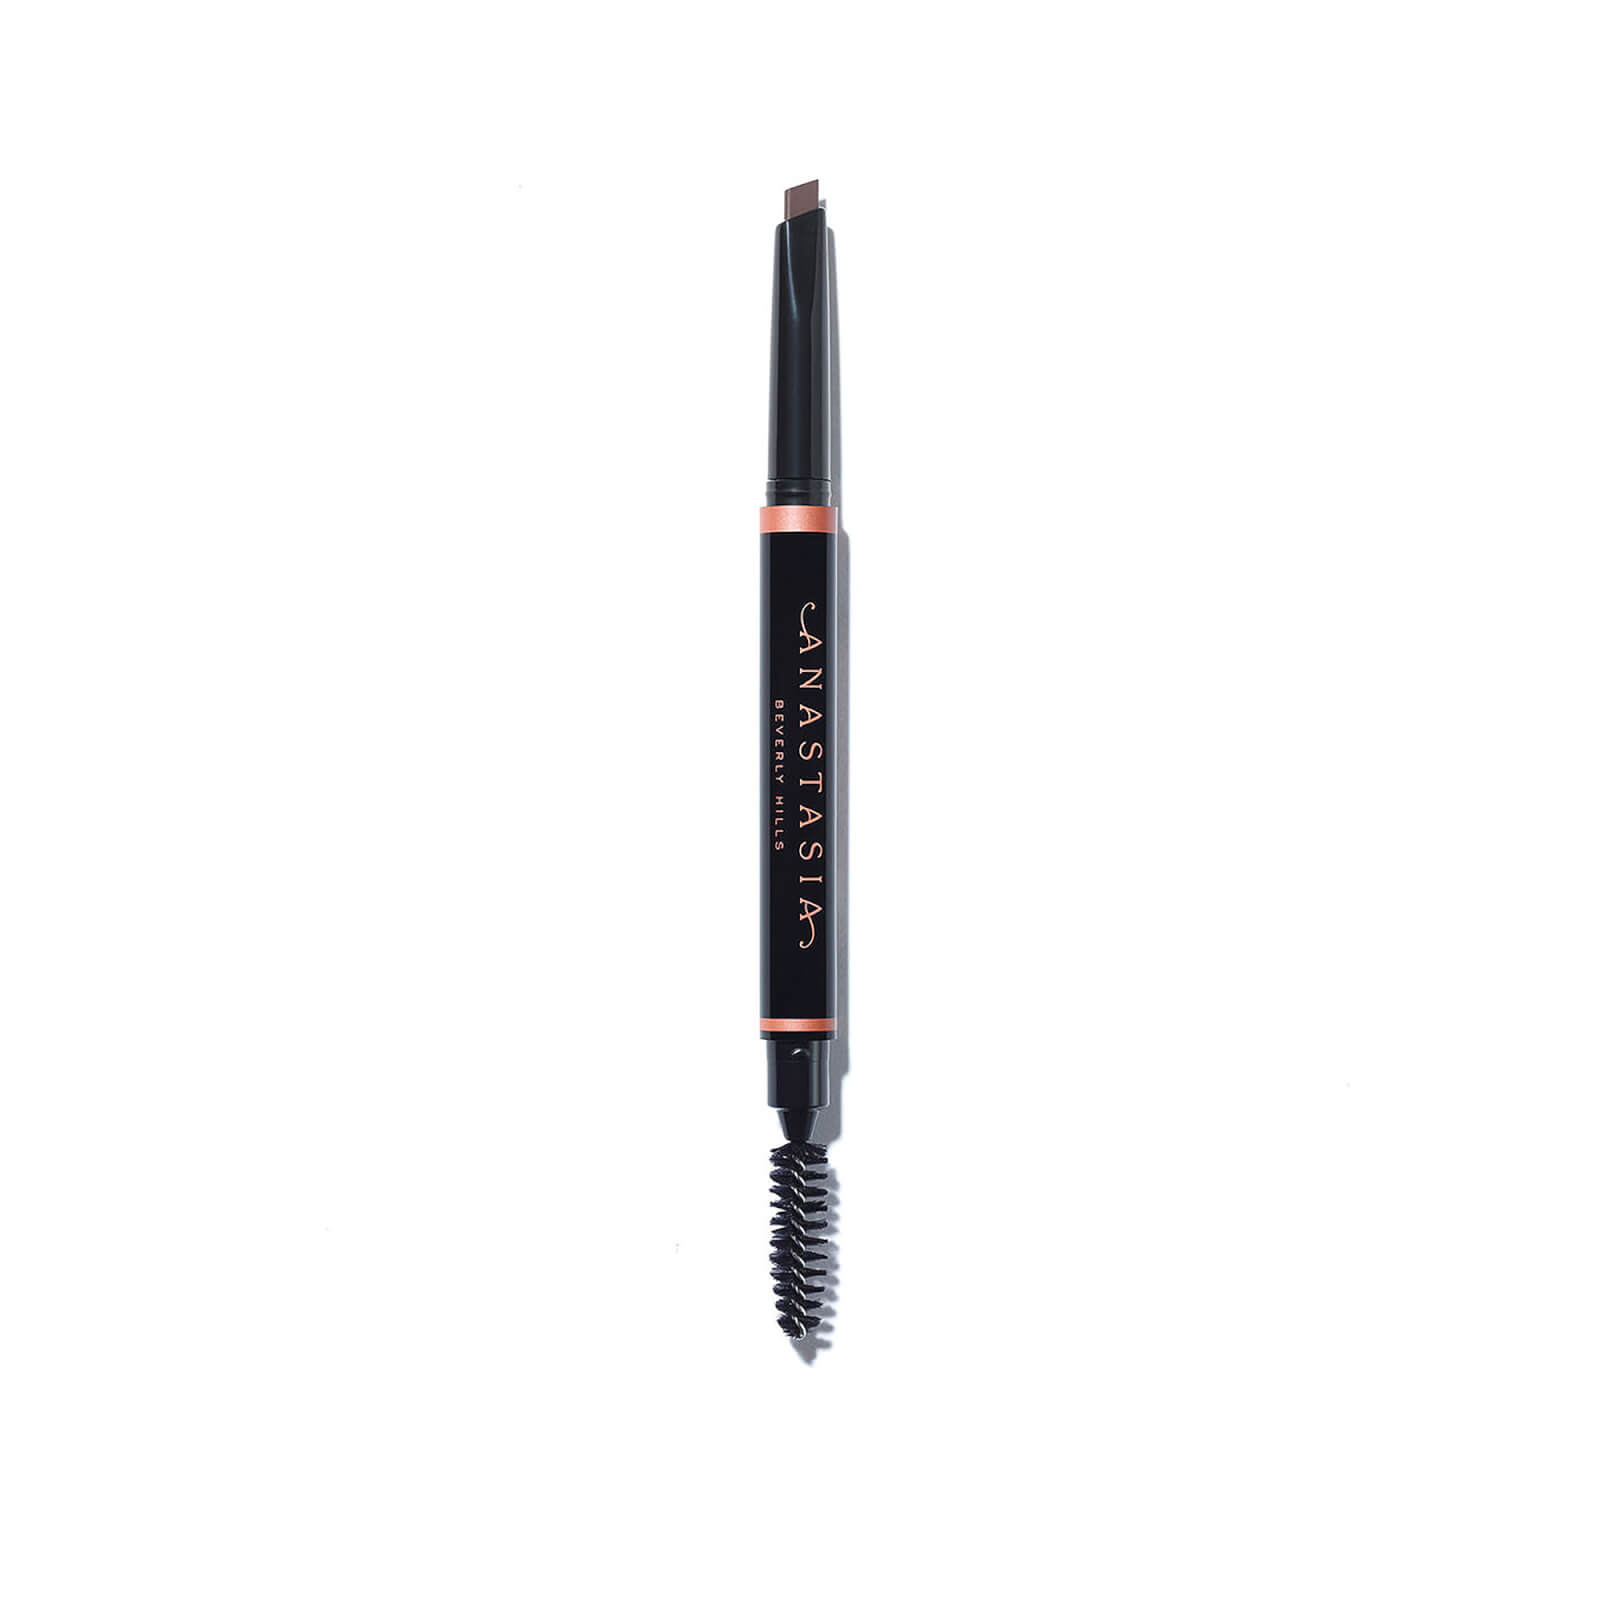 Brow Definer - 0.2g - Taupe